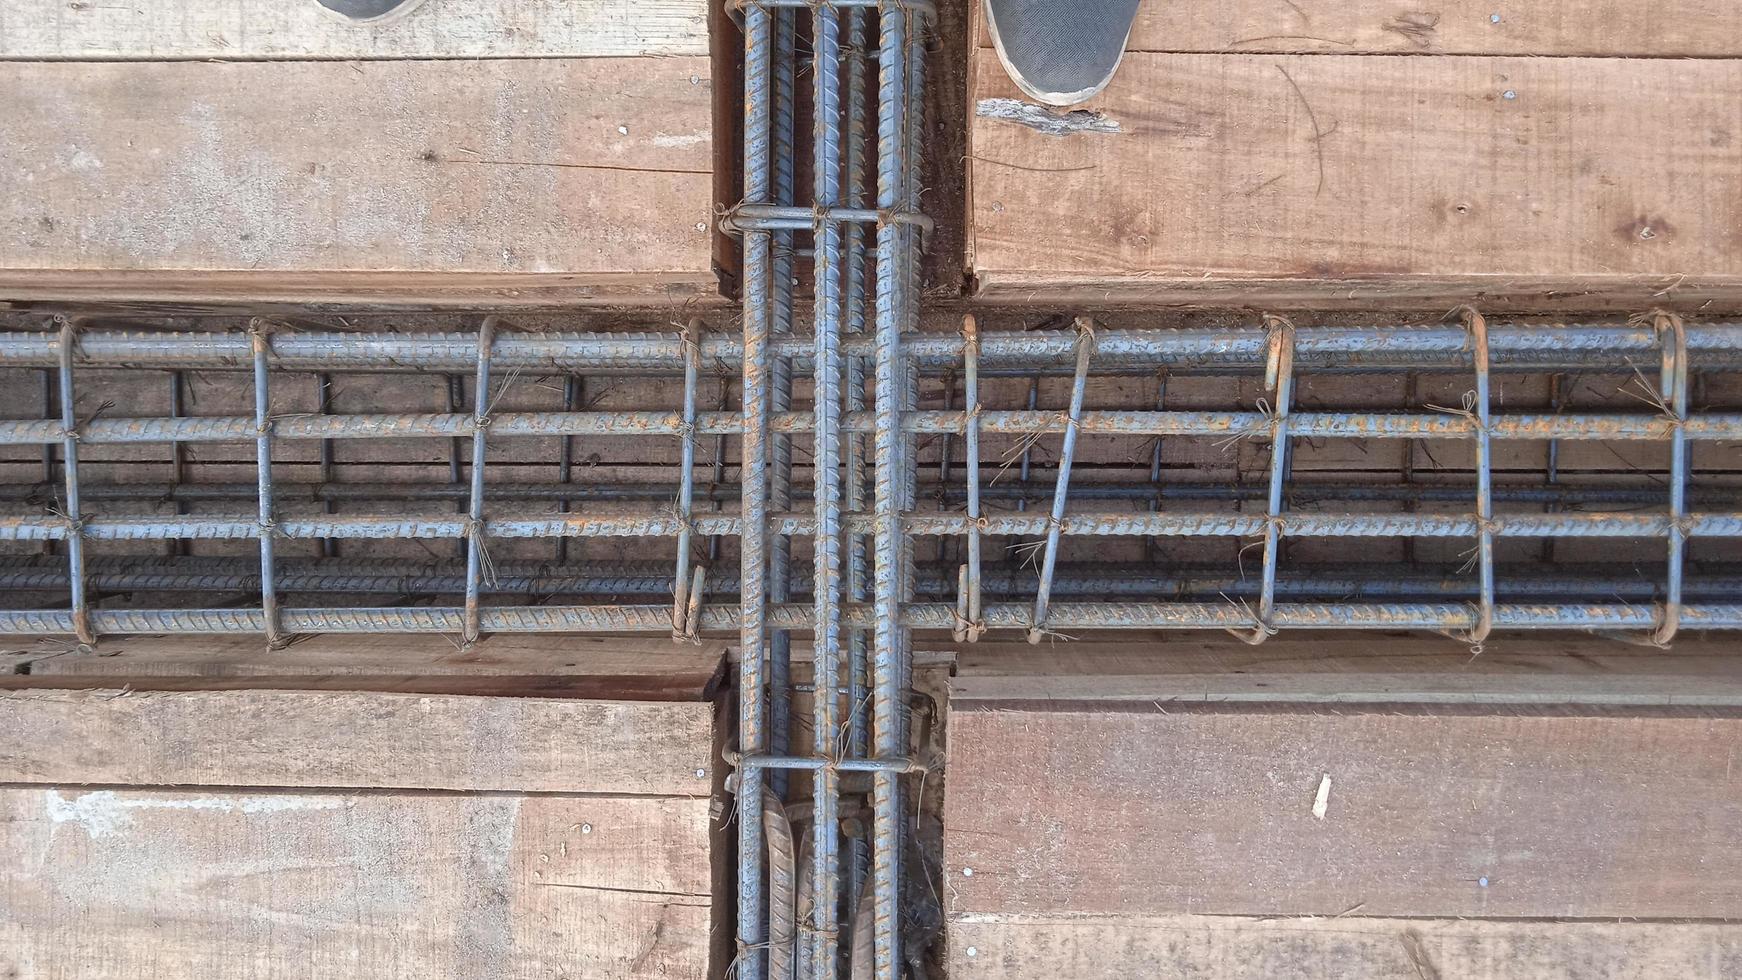 Close up view of reinforcement of concrete Construction rebar steel work reinforcement at a construction site. Steel bar construction for concreting photo